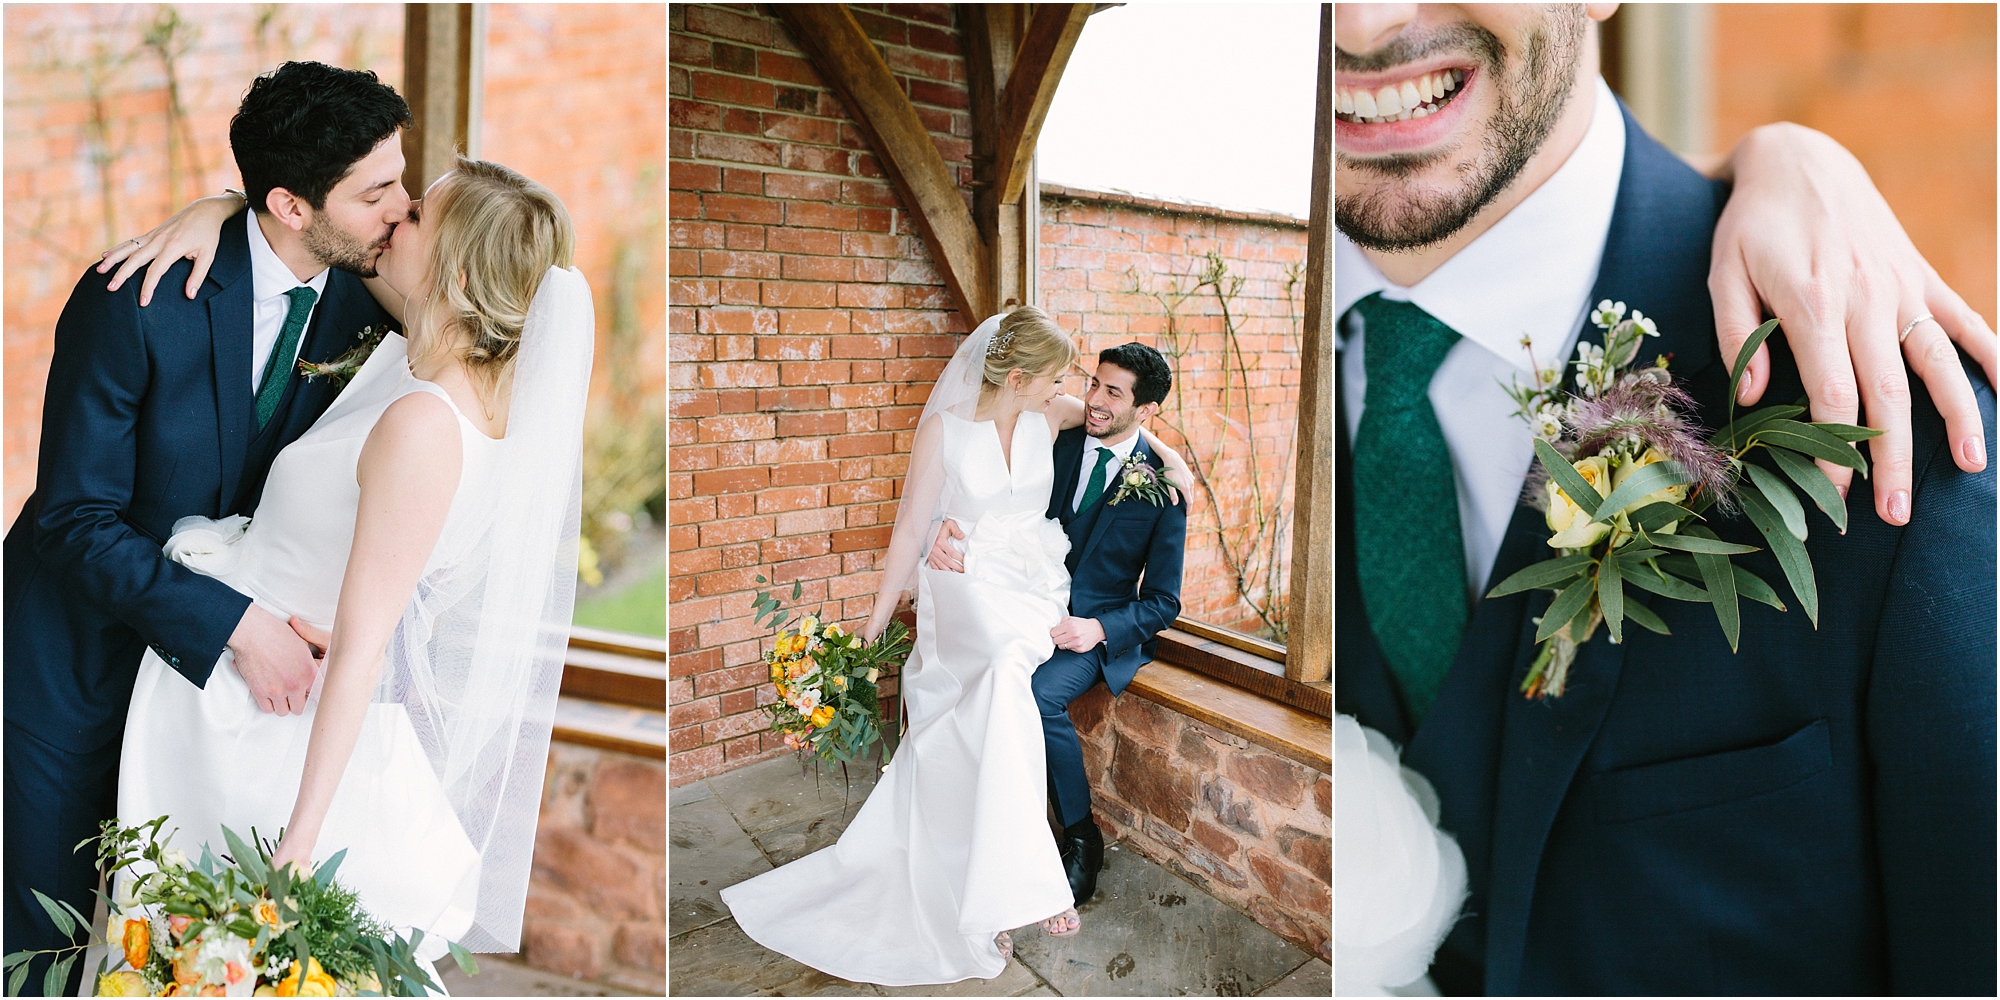 Bride and groom in the arbour at Upton Barn Wedding Venue